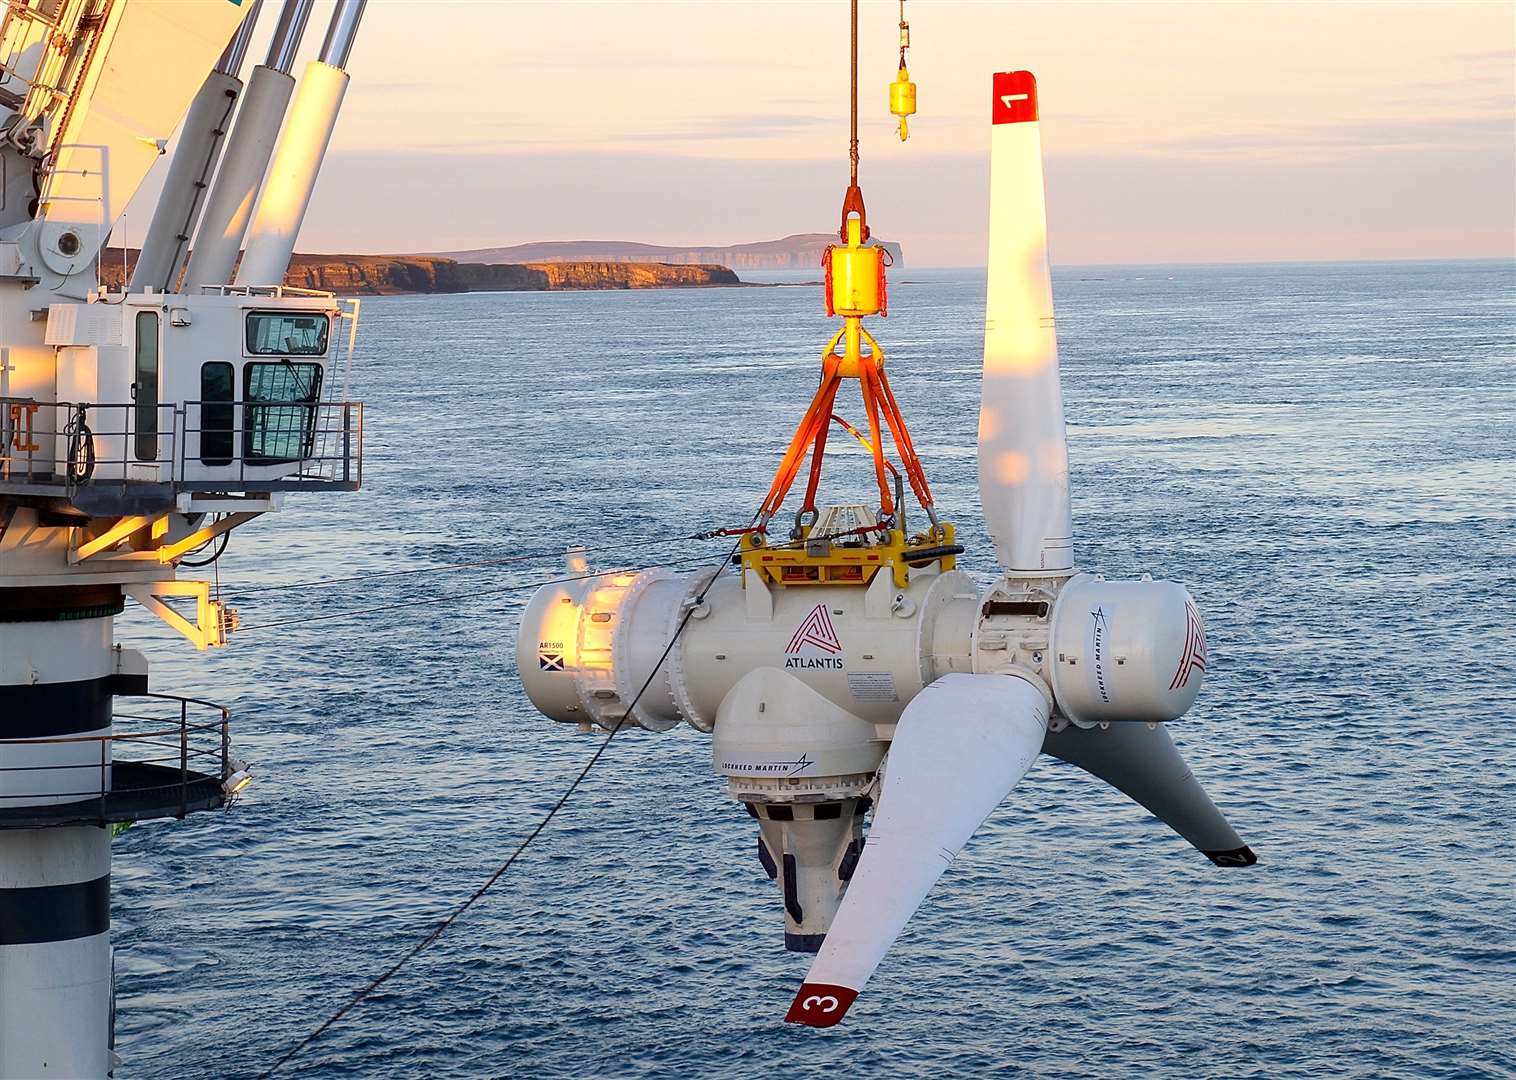 Electricity sales from MeyGen rose to £3.9 million last year